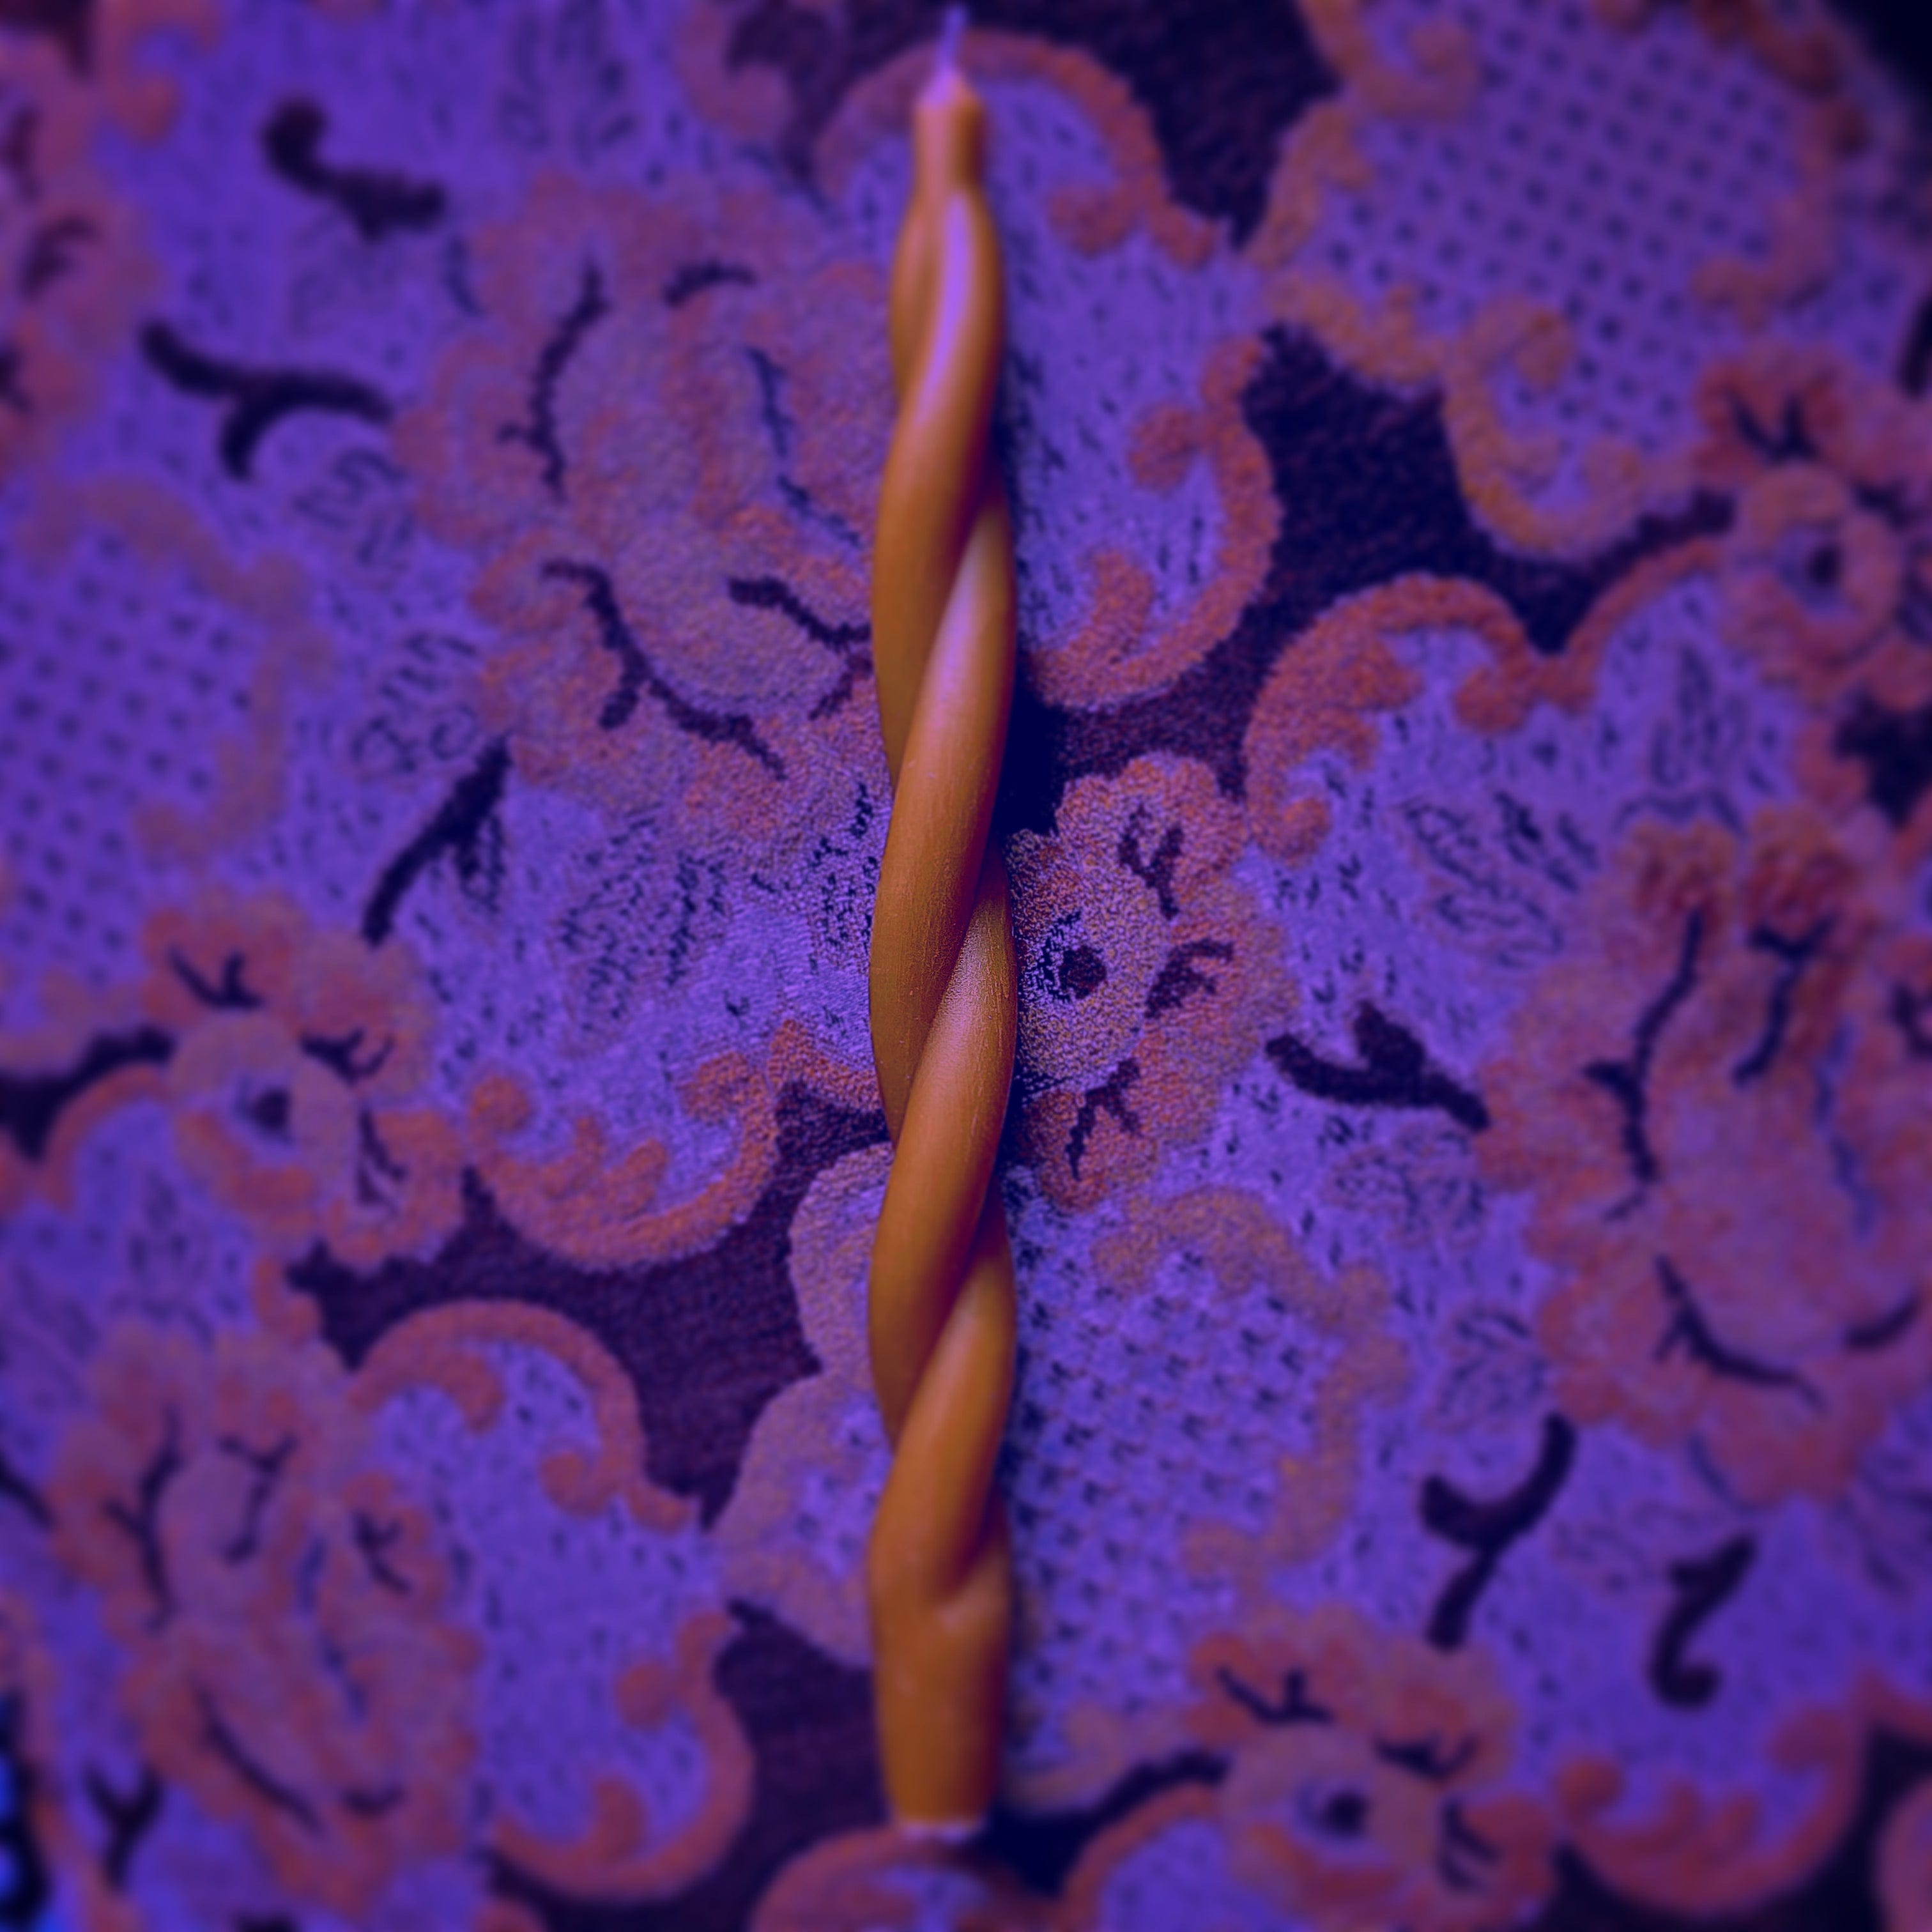 Lisoire Candle BEESWAX TWISTED TAPER 'RENAISSANCE'